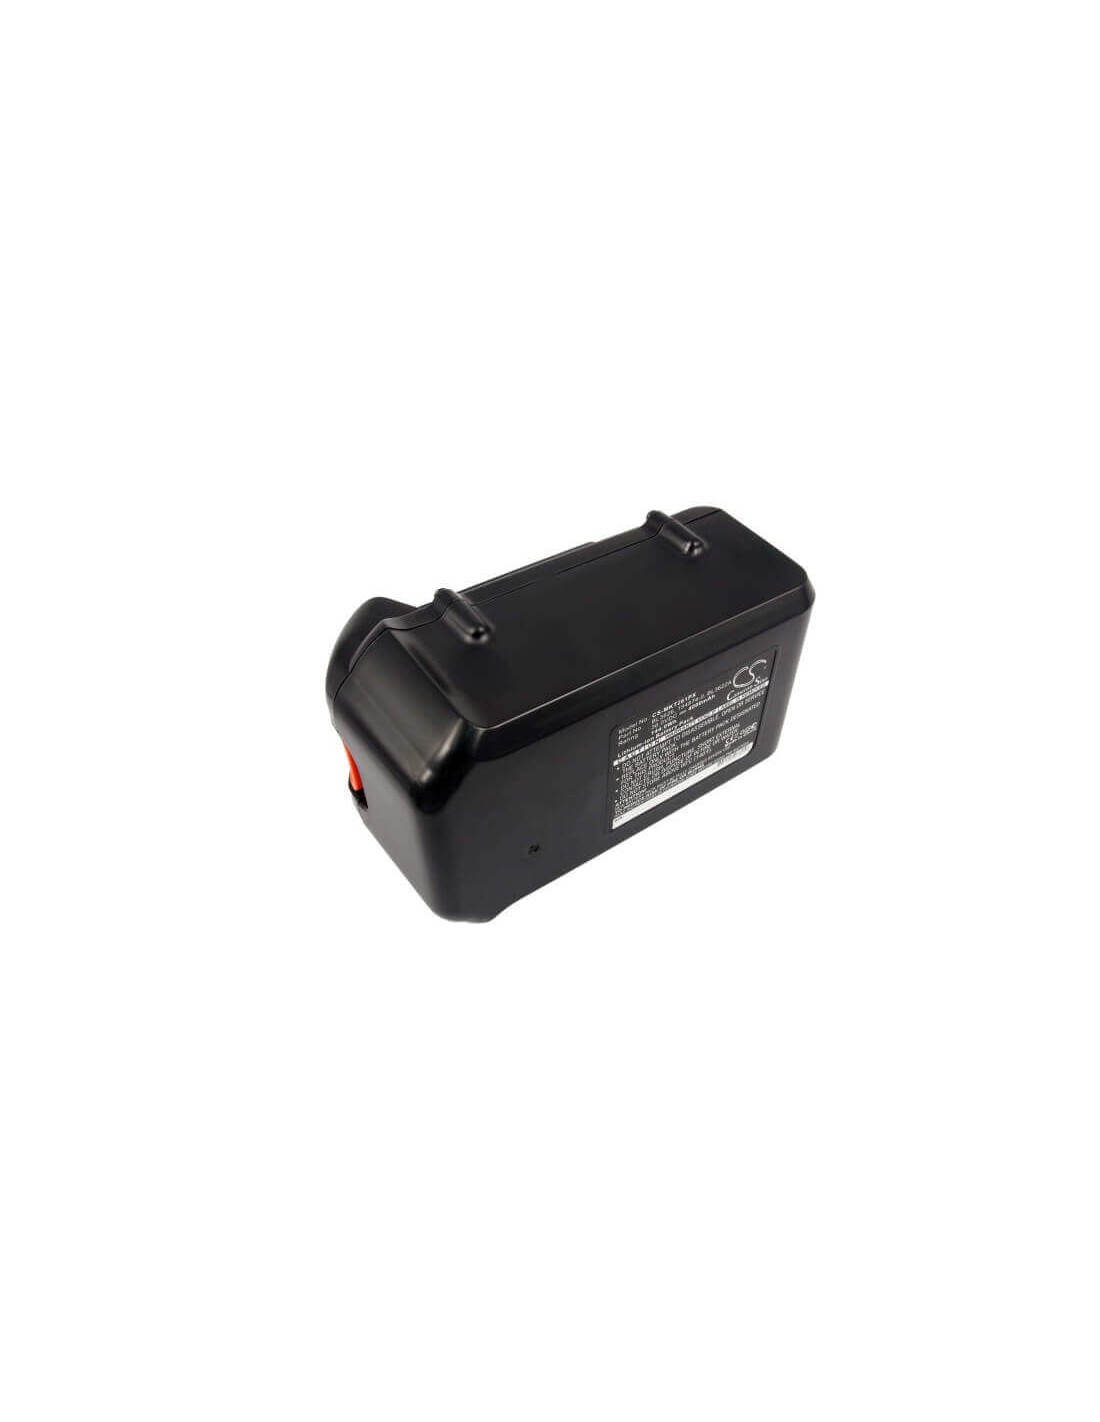 Battery for Makita Bhr261, Bhr261rde, Lawnmower Mbc231drd 36V, 4000mAh - 144.00Wh